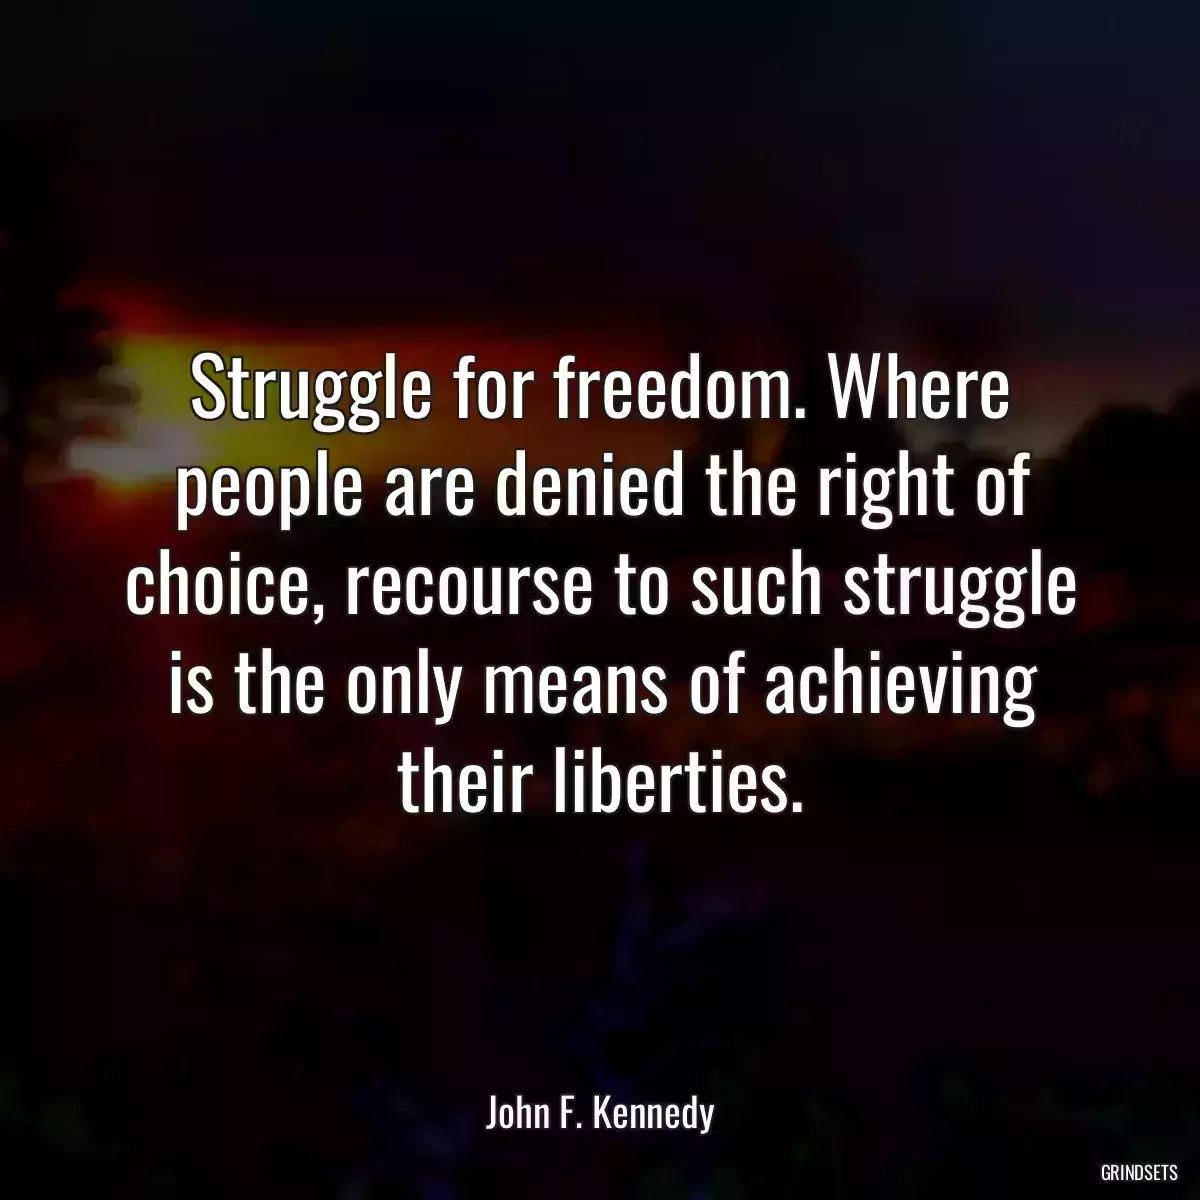 Struggle for freedom. Where people are denied the right of choice, recourse to such struggle is the only means of achieving their liberties.